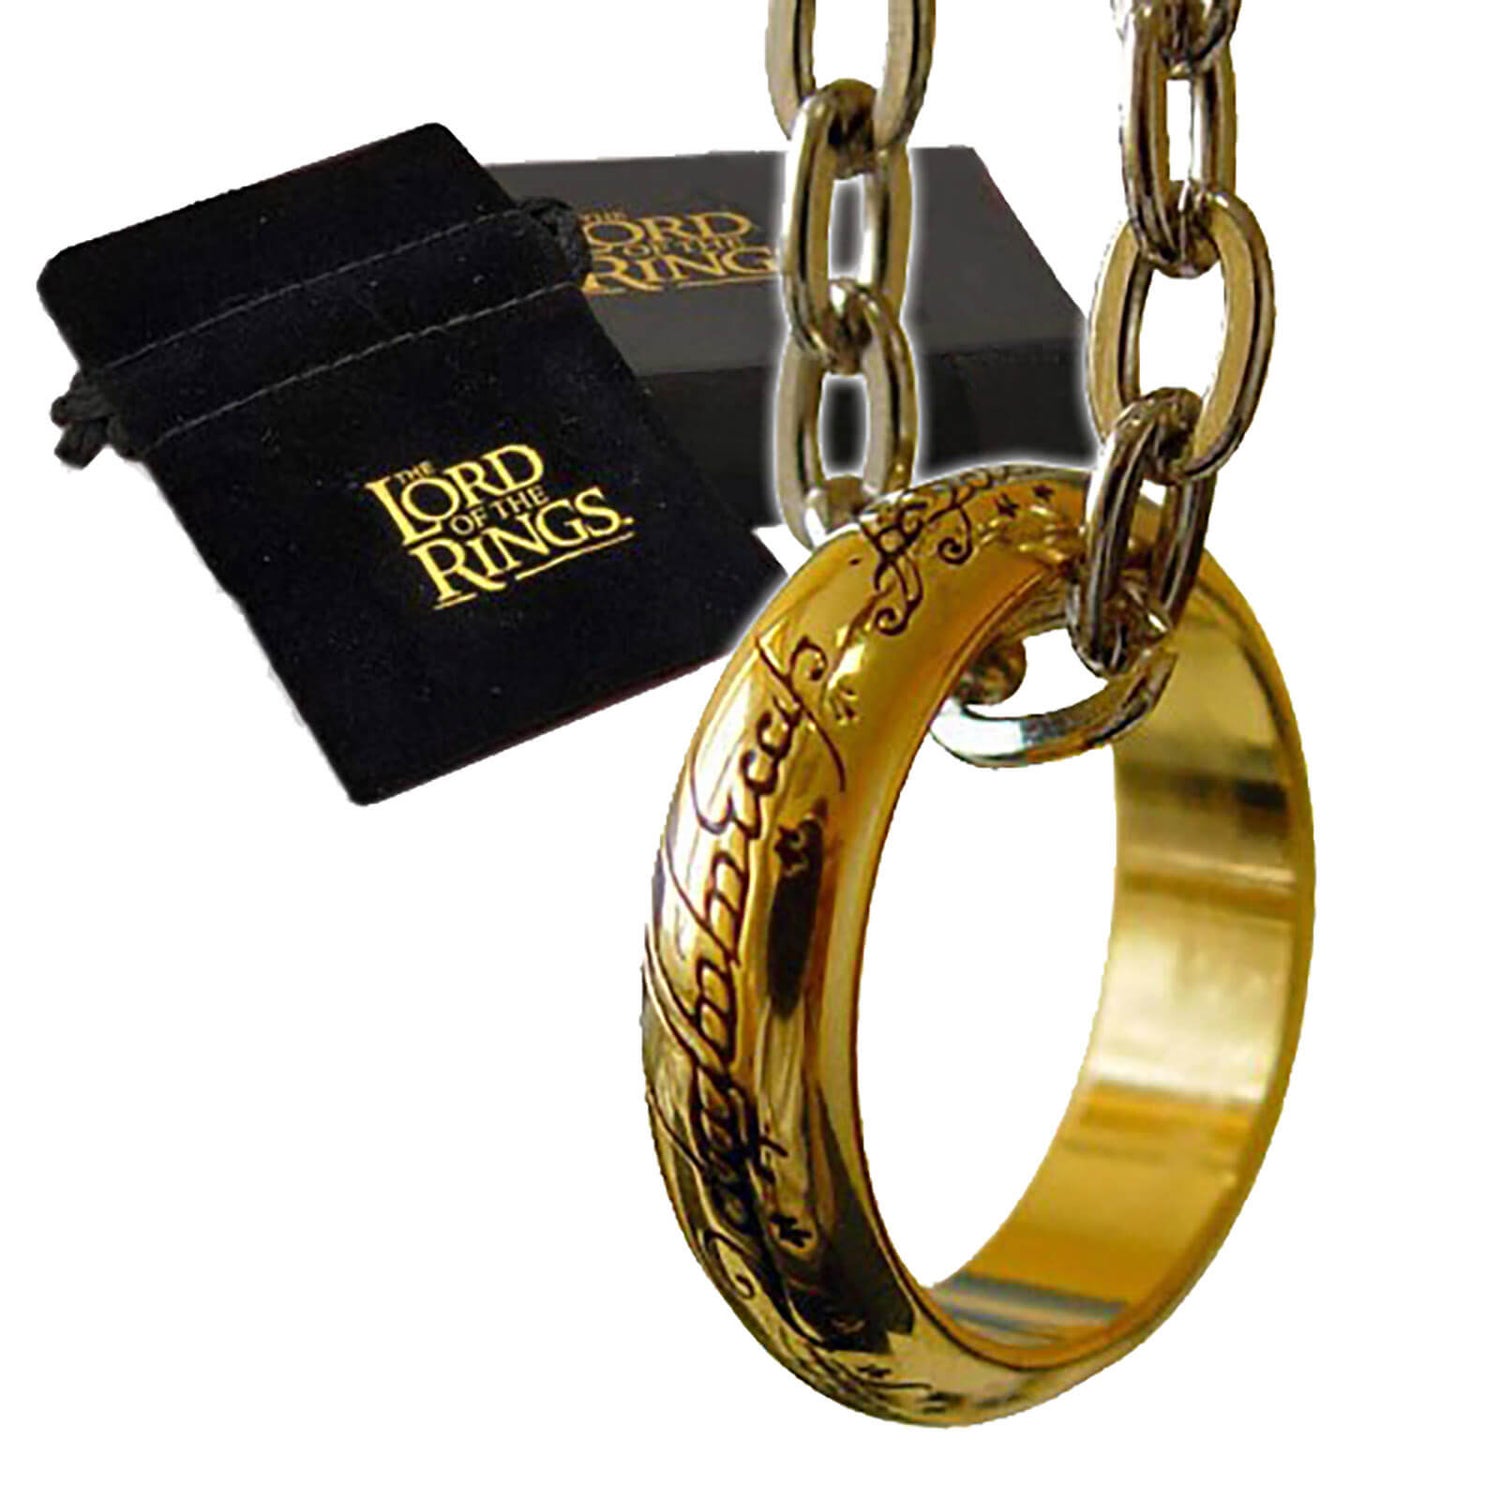 Lord Of The Rings The One Ring Prop Replica Merchandise Zavvi Australia